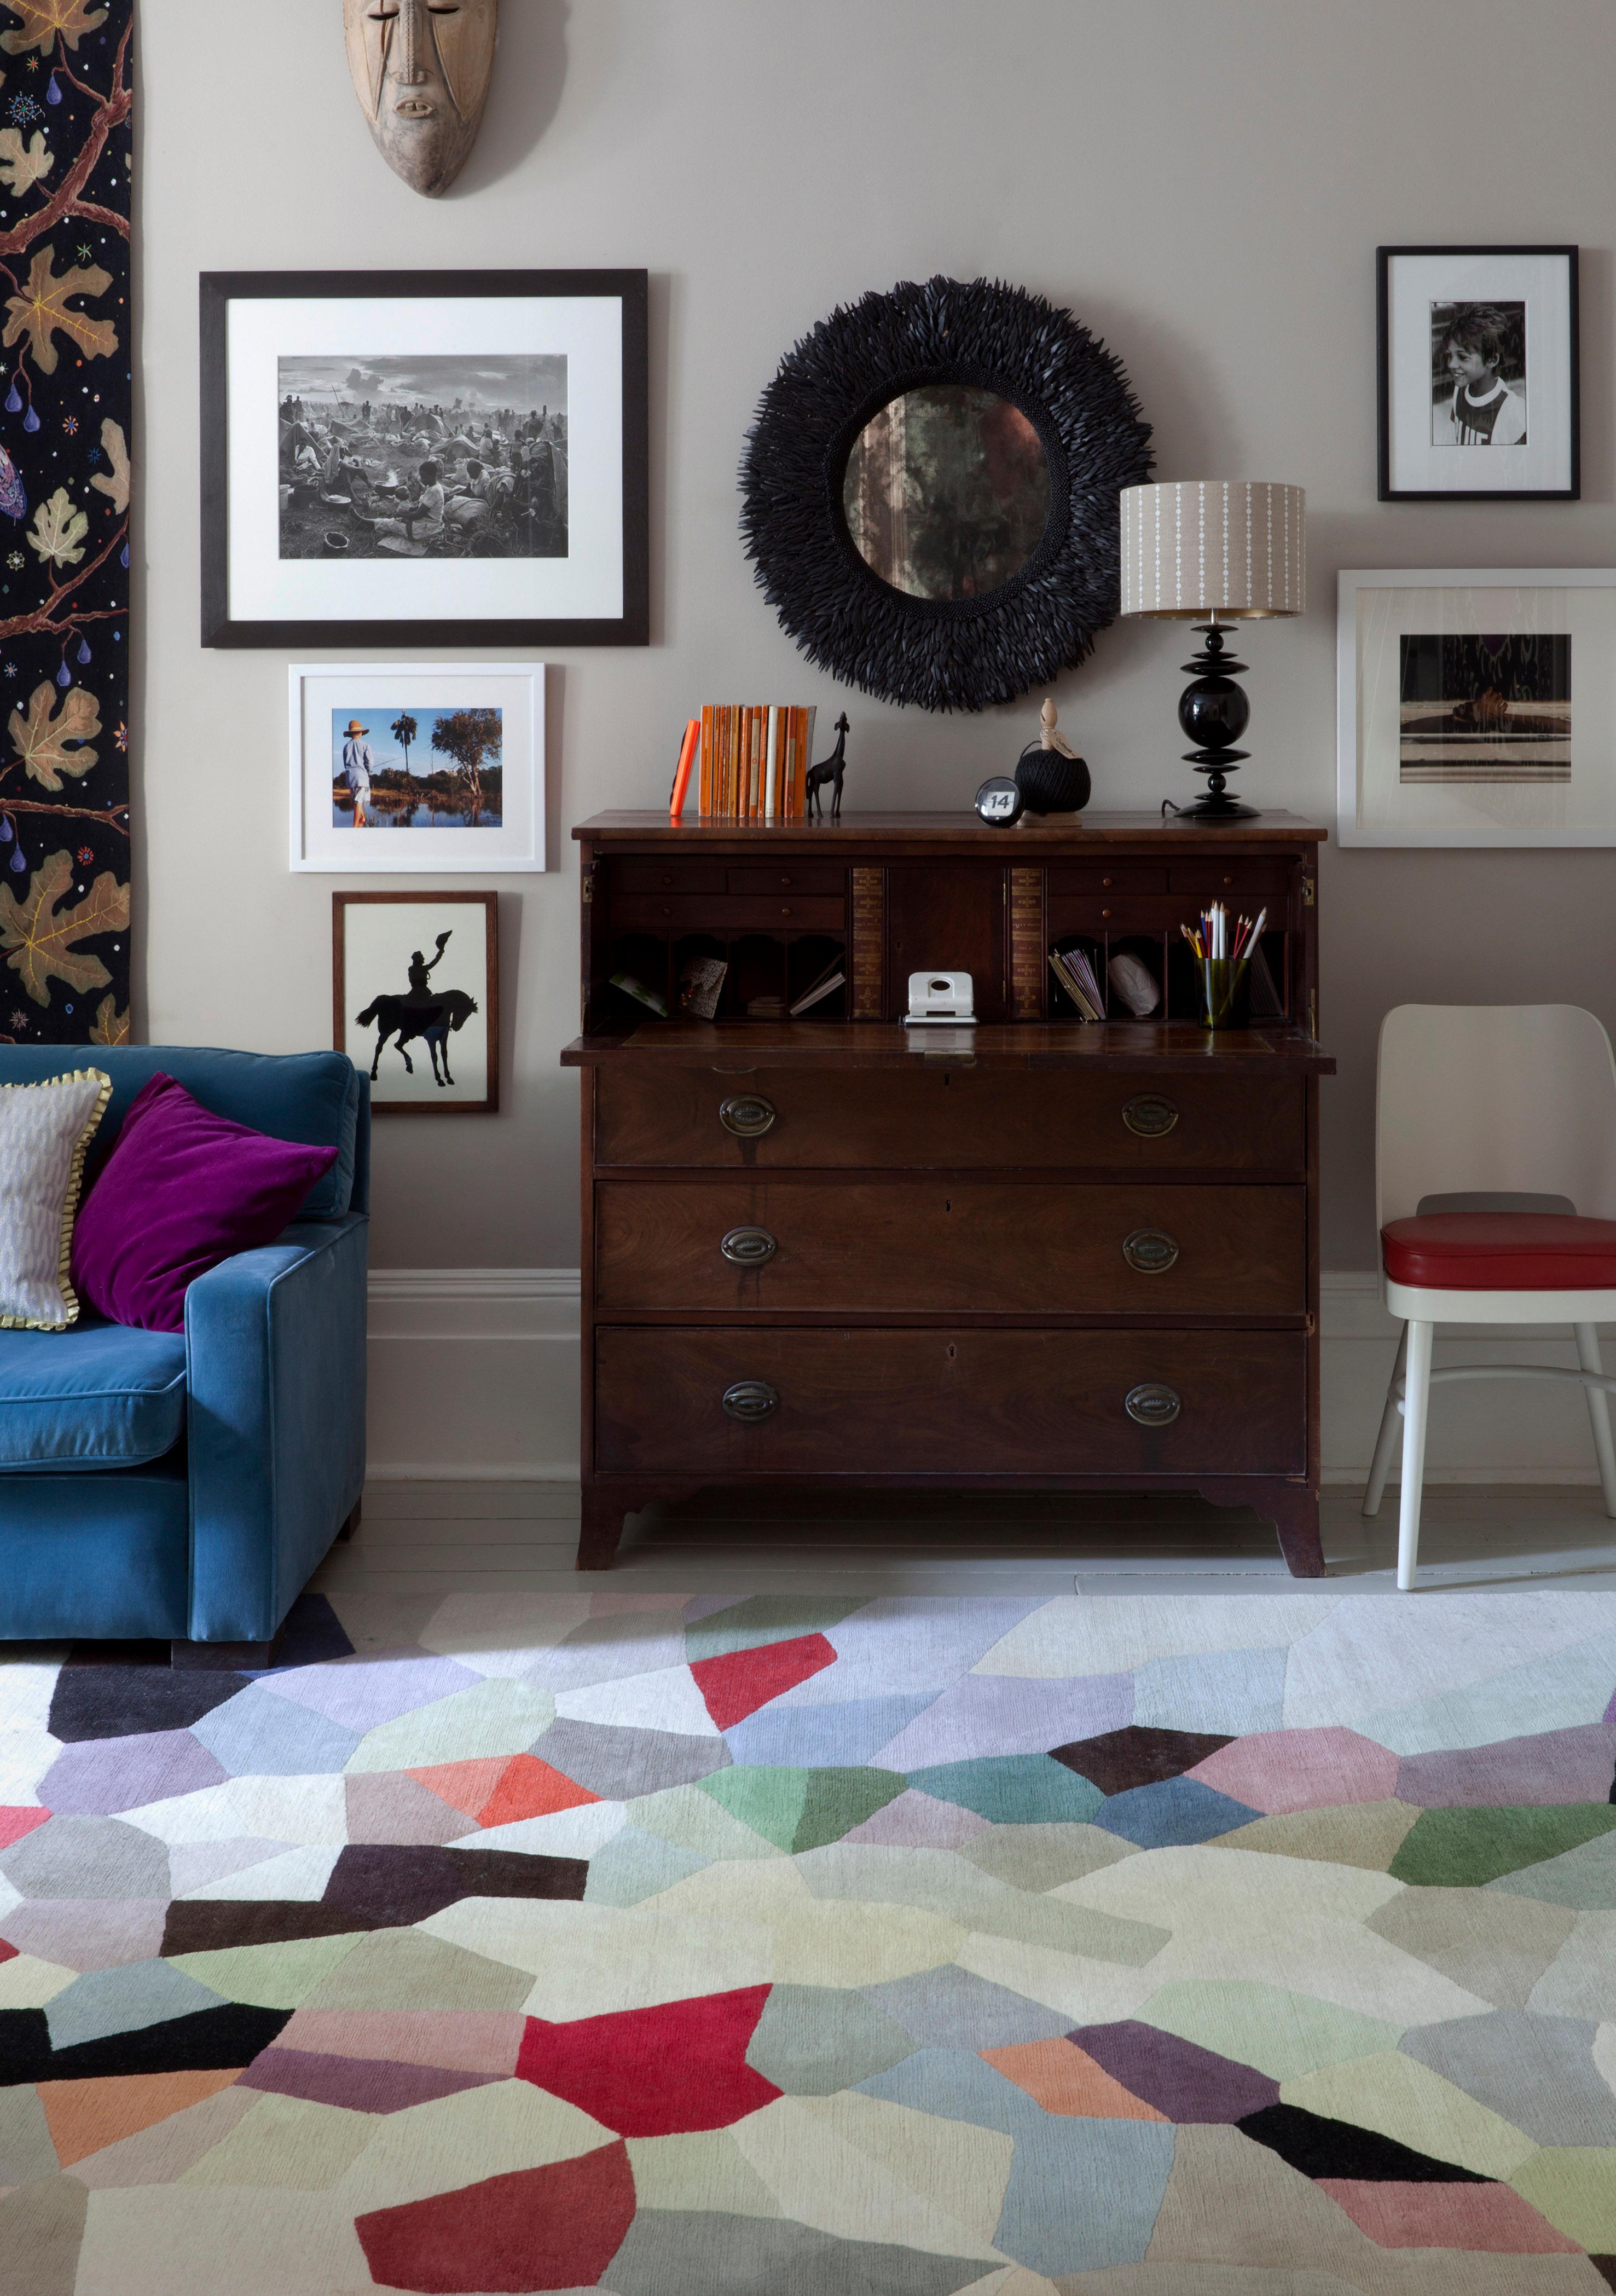 Our Palette contemporary rug by Fiona Curran is a riot of color hand-knotted in Tibetan wool. Fiona says: “Palette depicts an explosion of color that developed out of painted and collaged forms combined with computer manipulation”. Hand-knotted